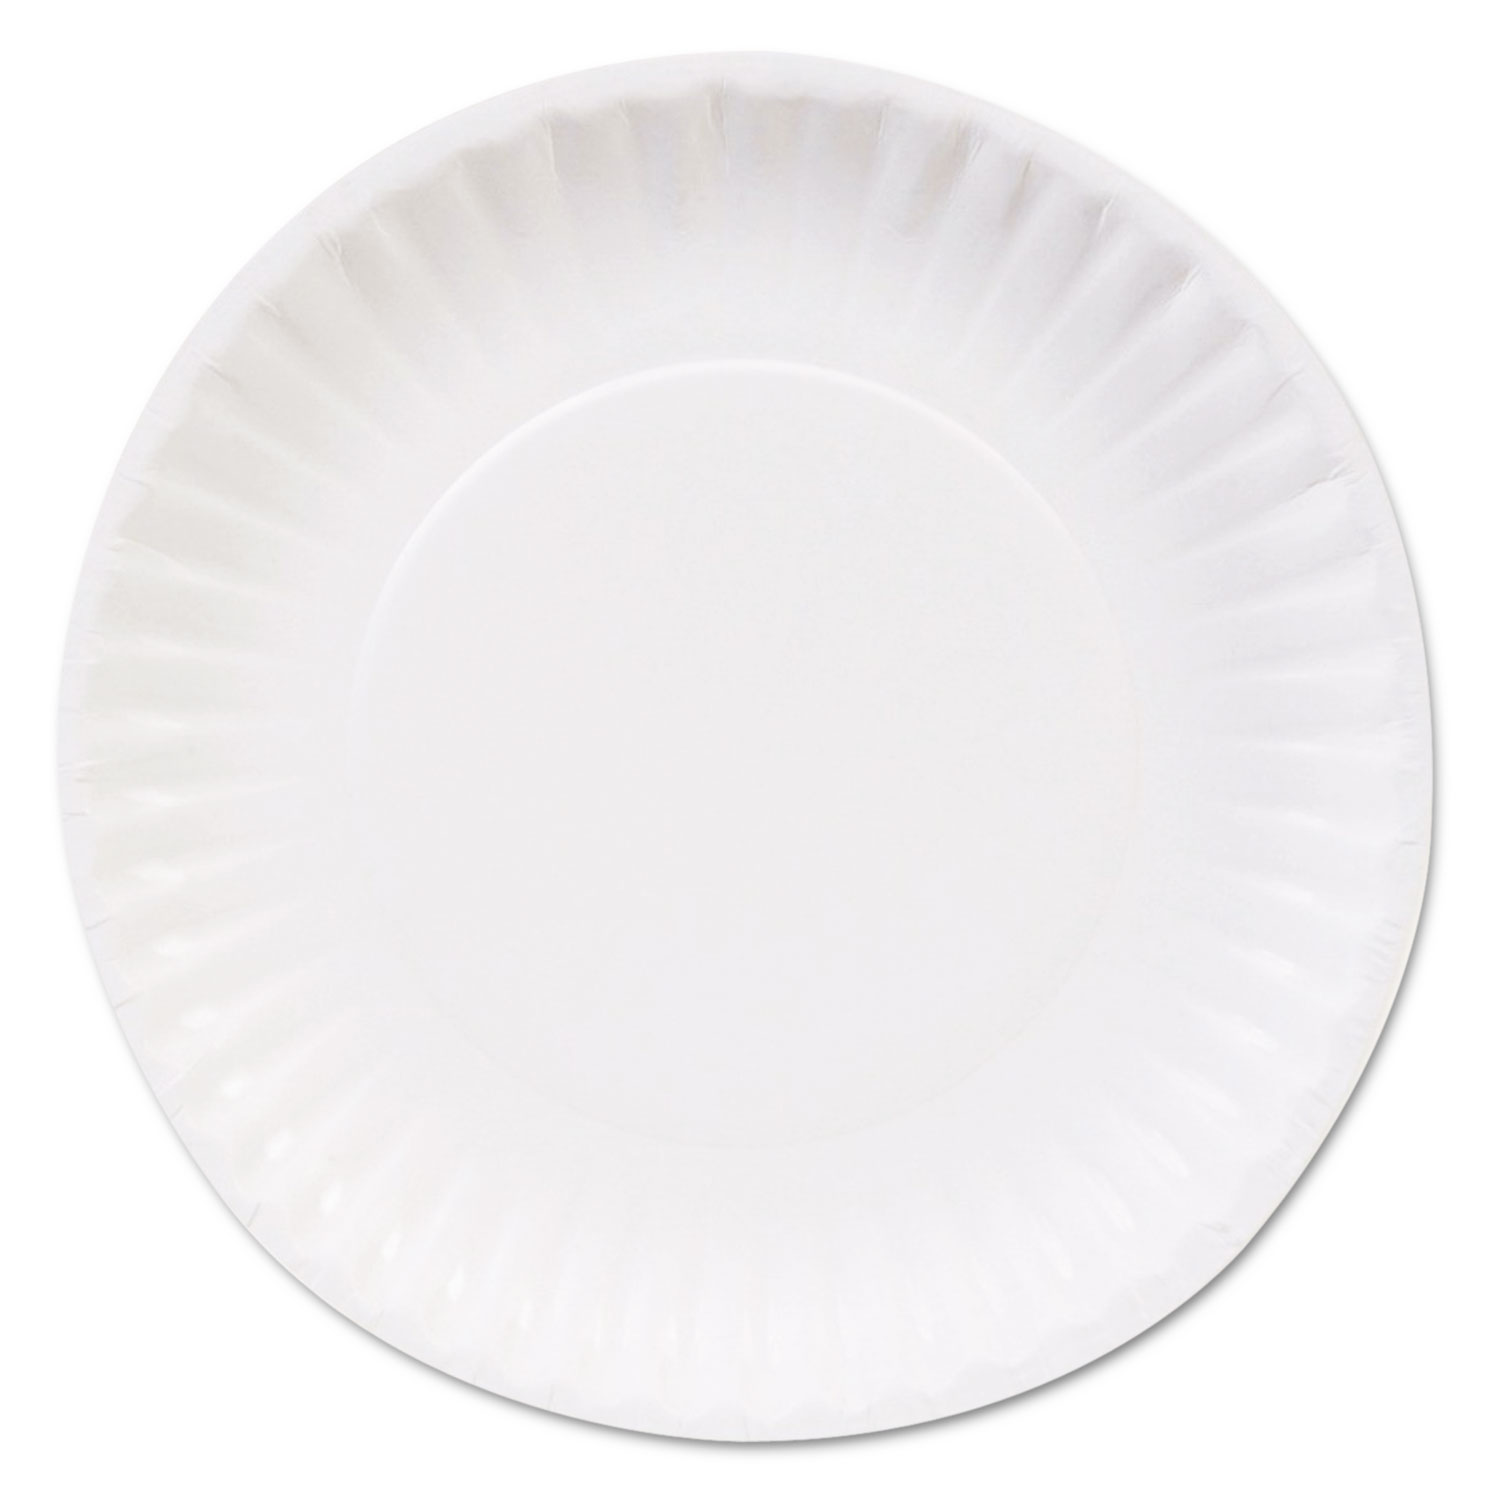  Dixie Basic DBP06W Clay Coated Paper Plates, 6, White, 100/Pack, 12 Packs/Carton (DXEDBP06WCT) 